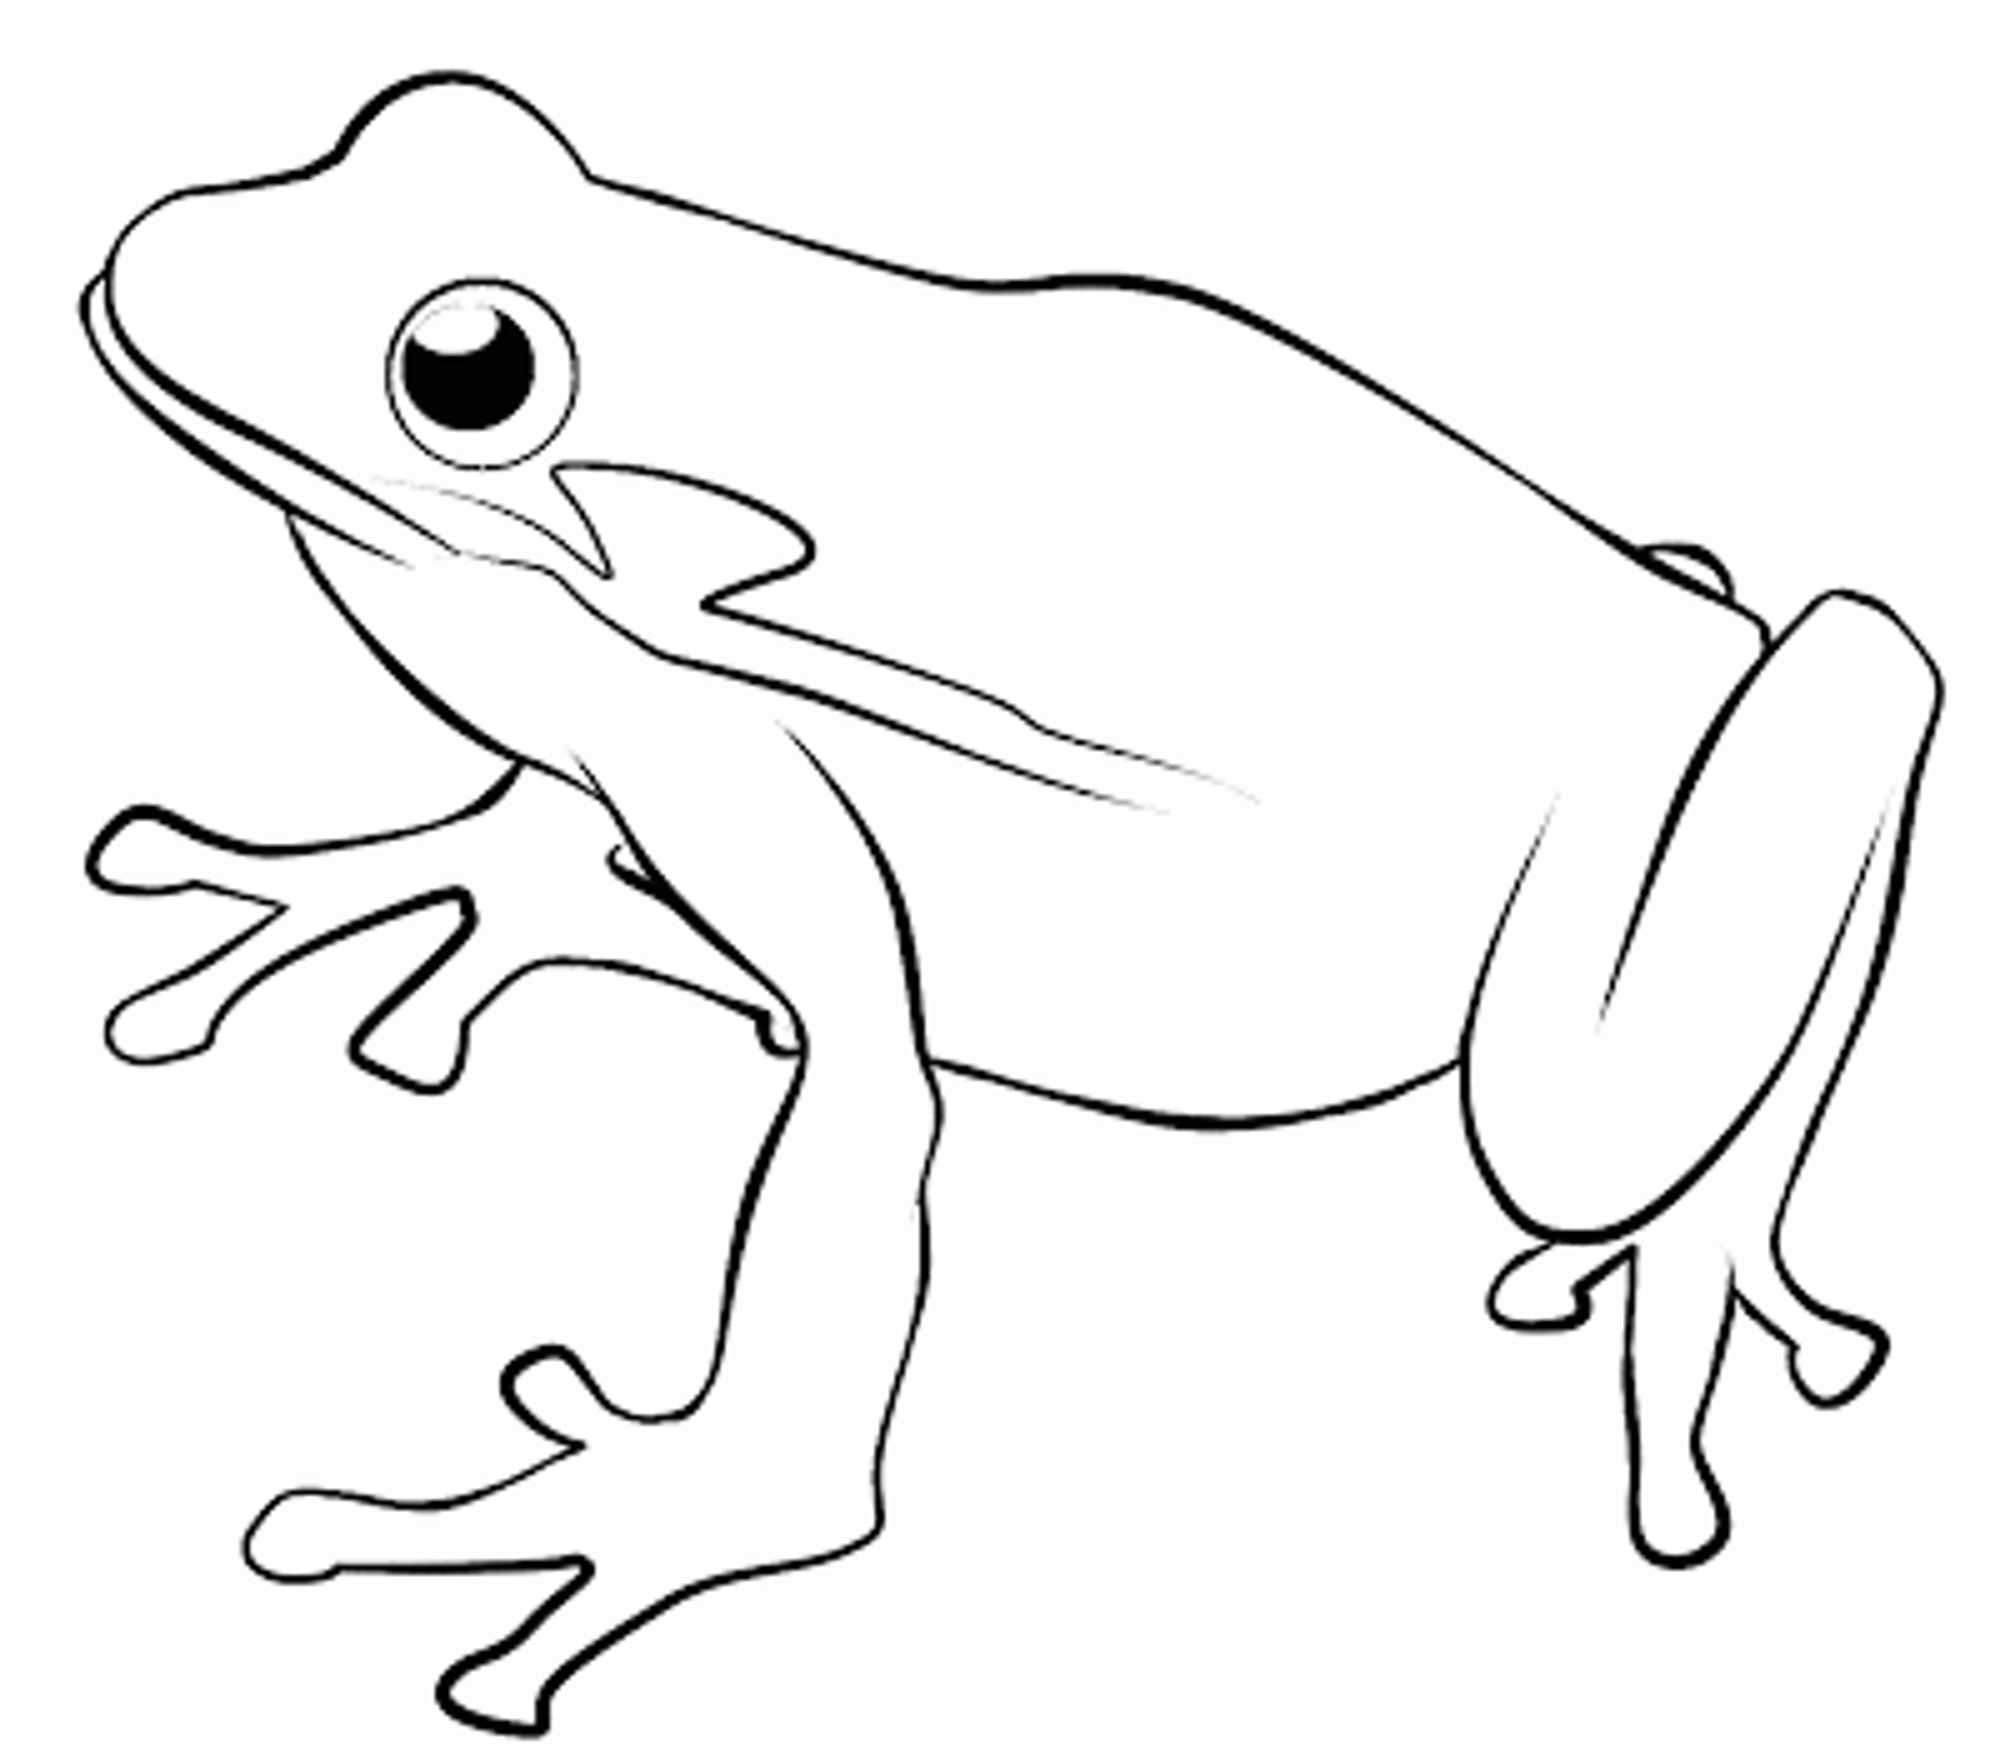 frog-coloring-pages-for-kids-bestappsforkids